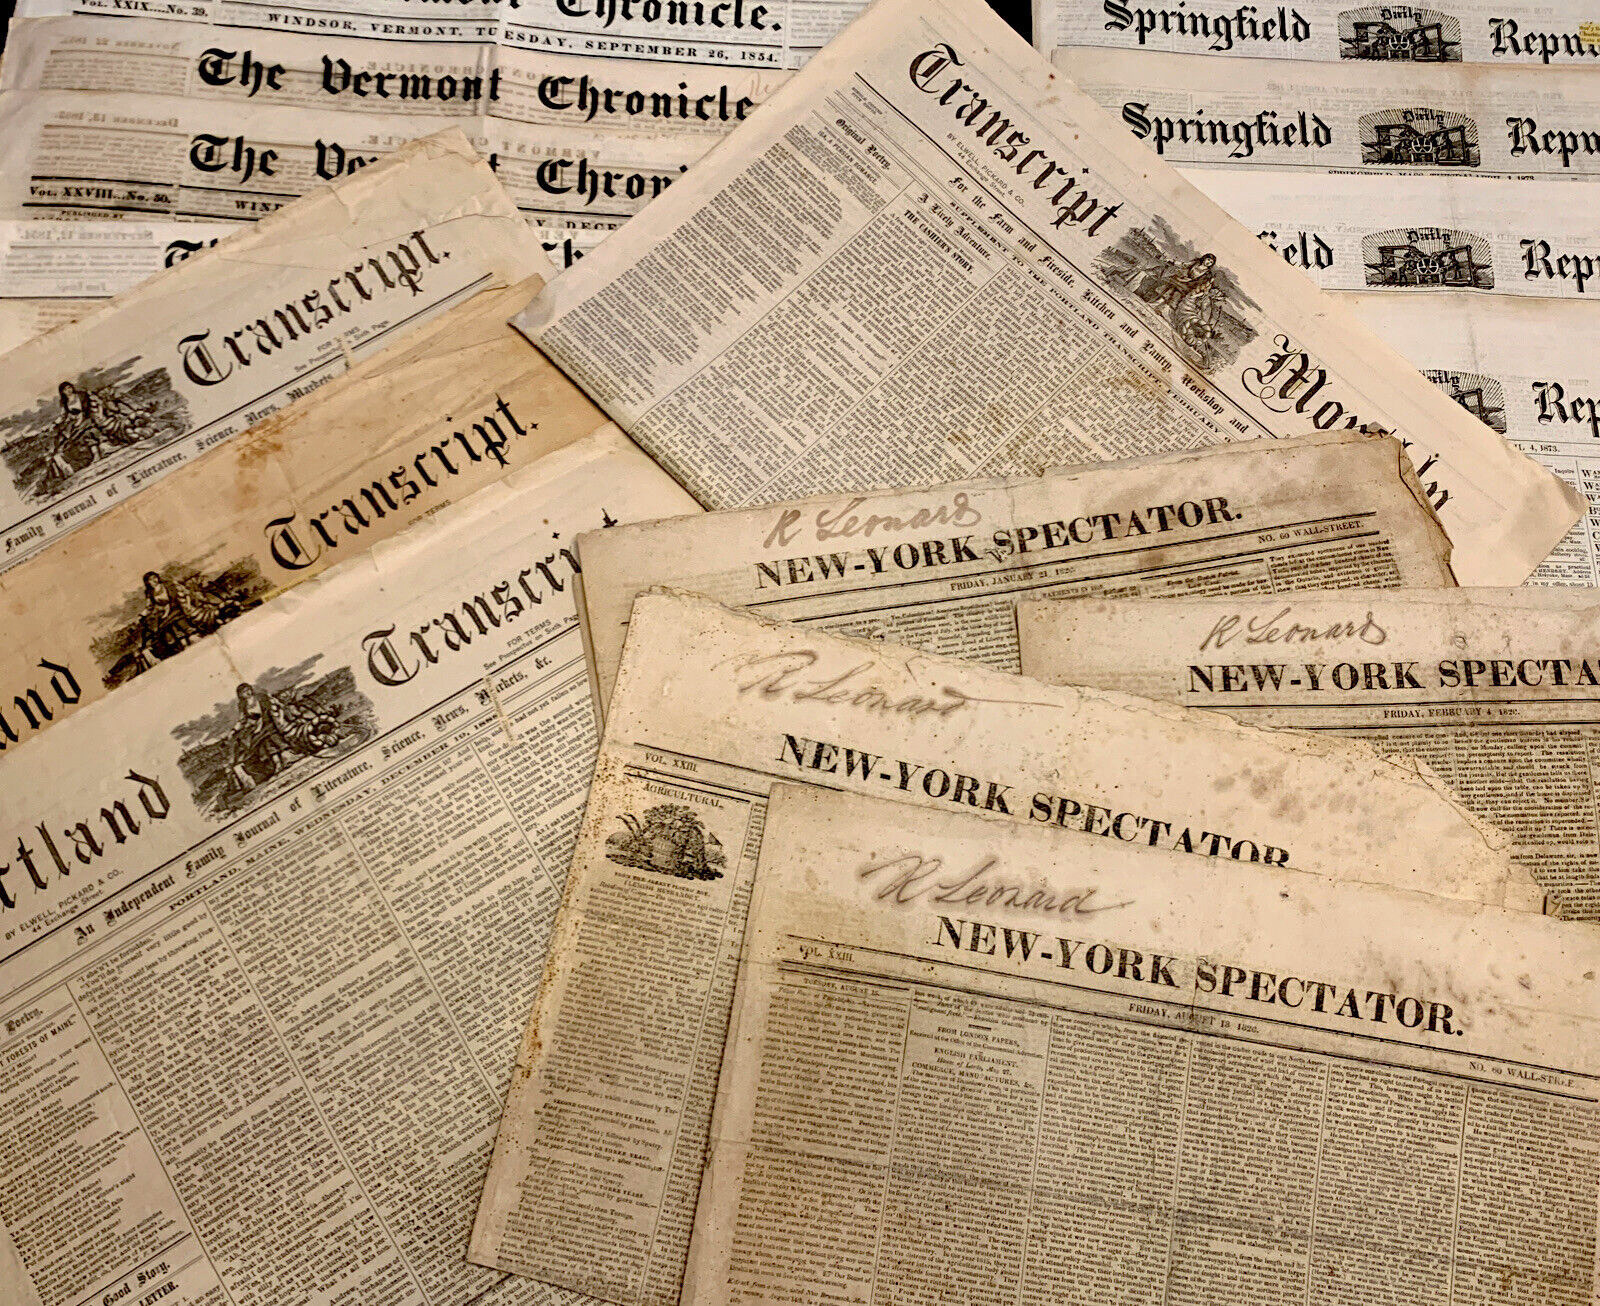 OLD NEWSPAPER FROM 1800s